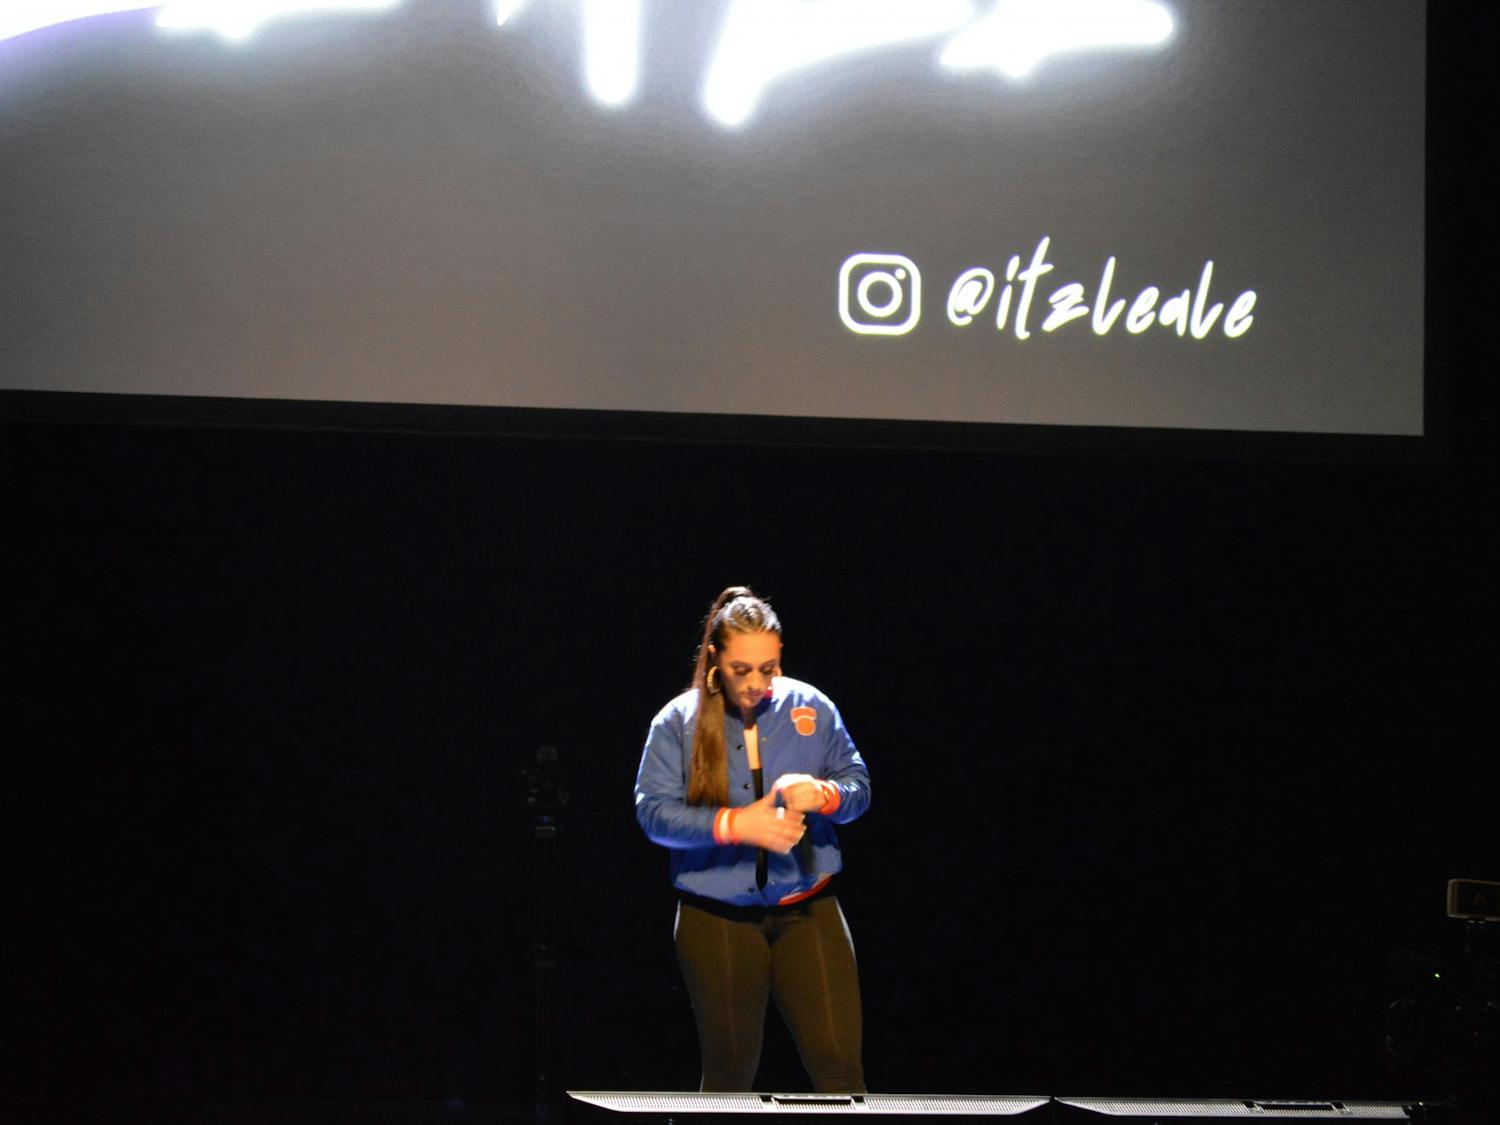 Leale, a Buffalo-based rapper, performed a 15-minute set for a packed CFA Mainstage Theater.&nbsp;